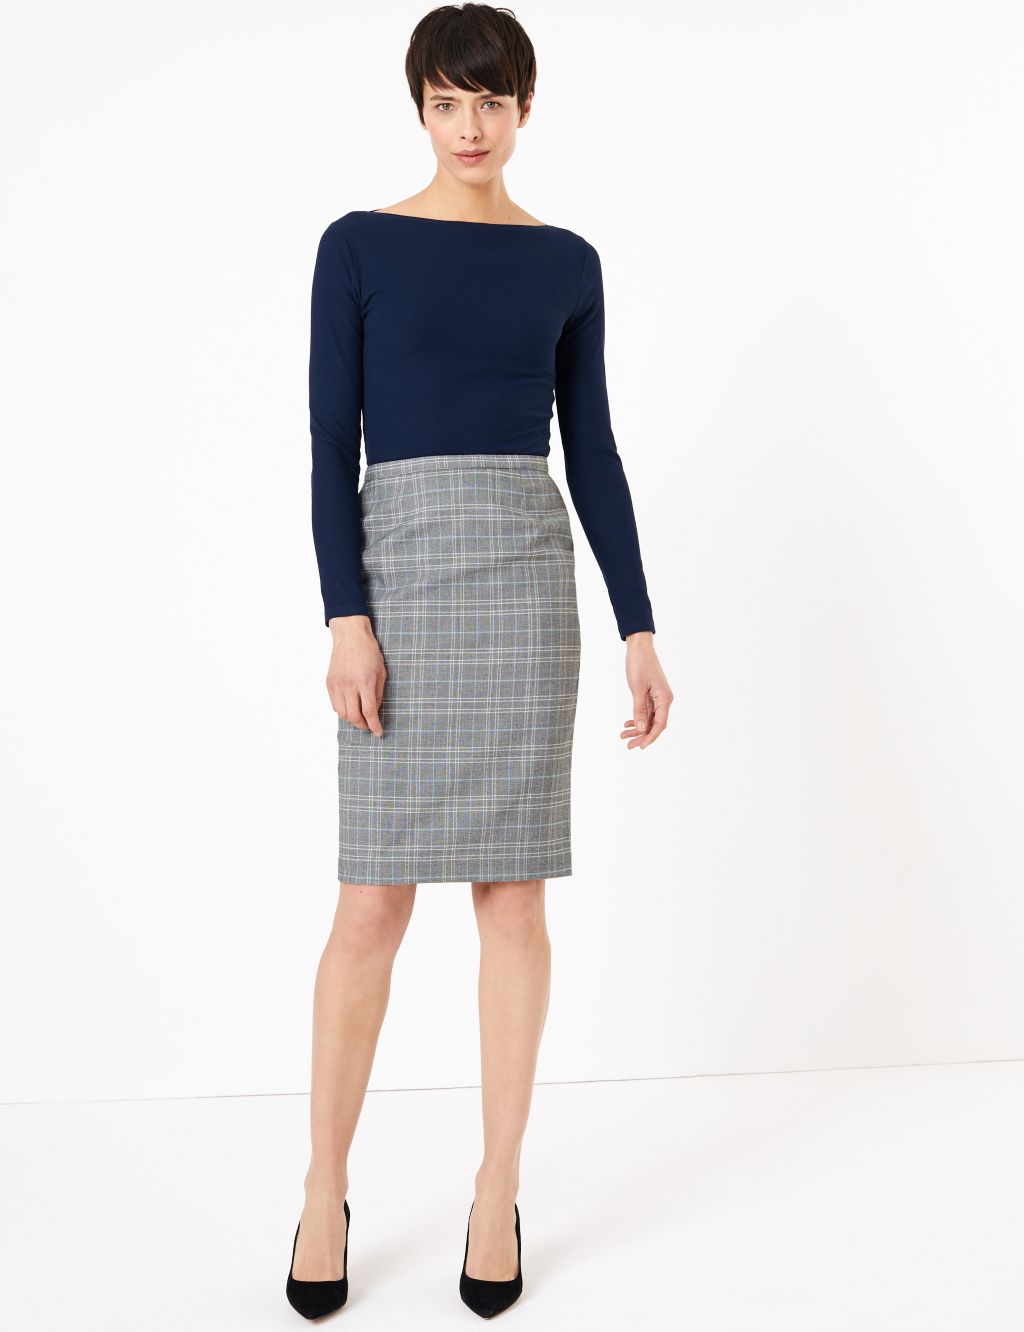 Checked Knee Length Pencil Skirt | M&S Collection | M&S